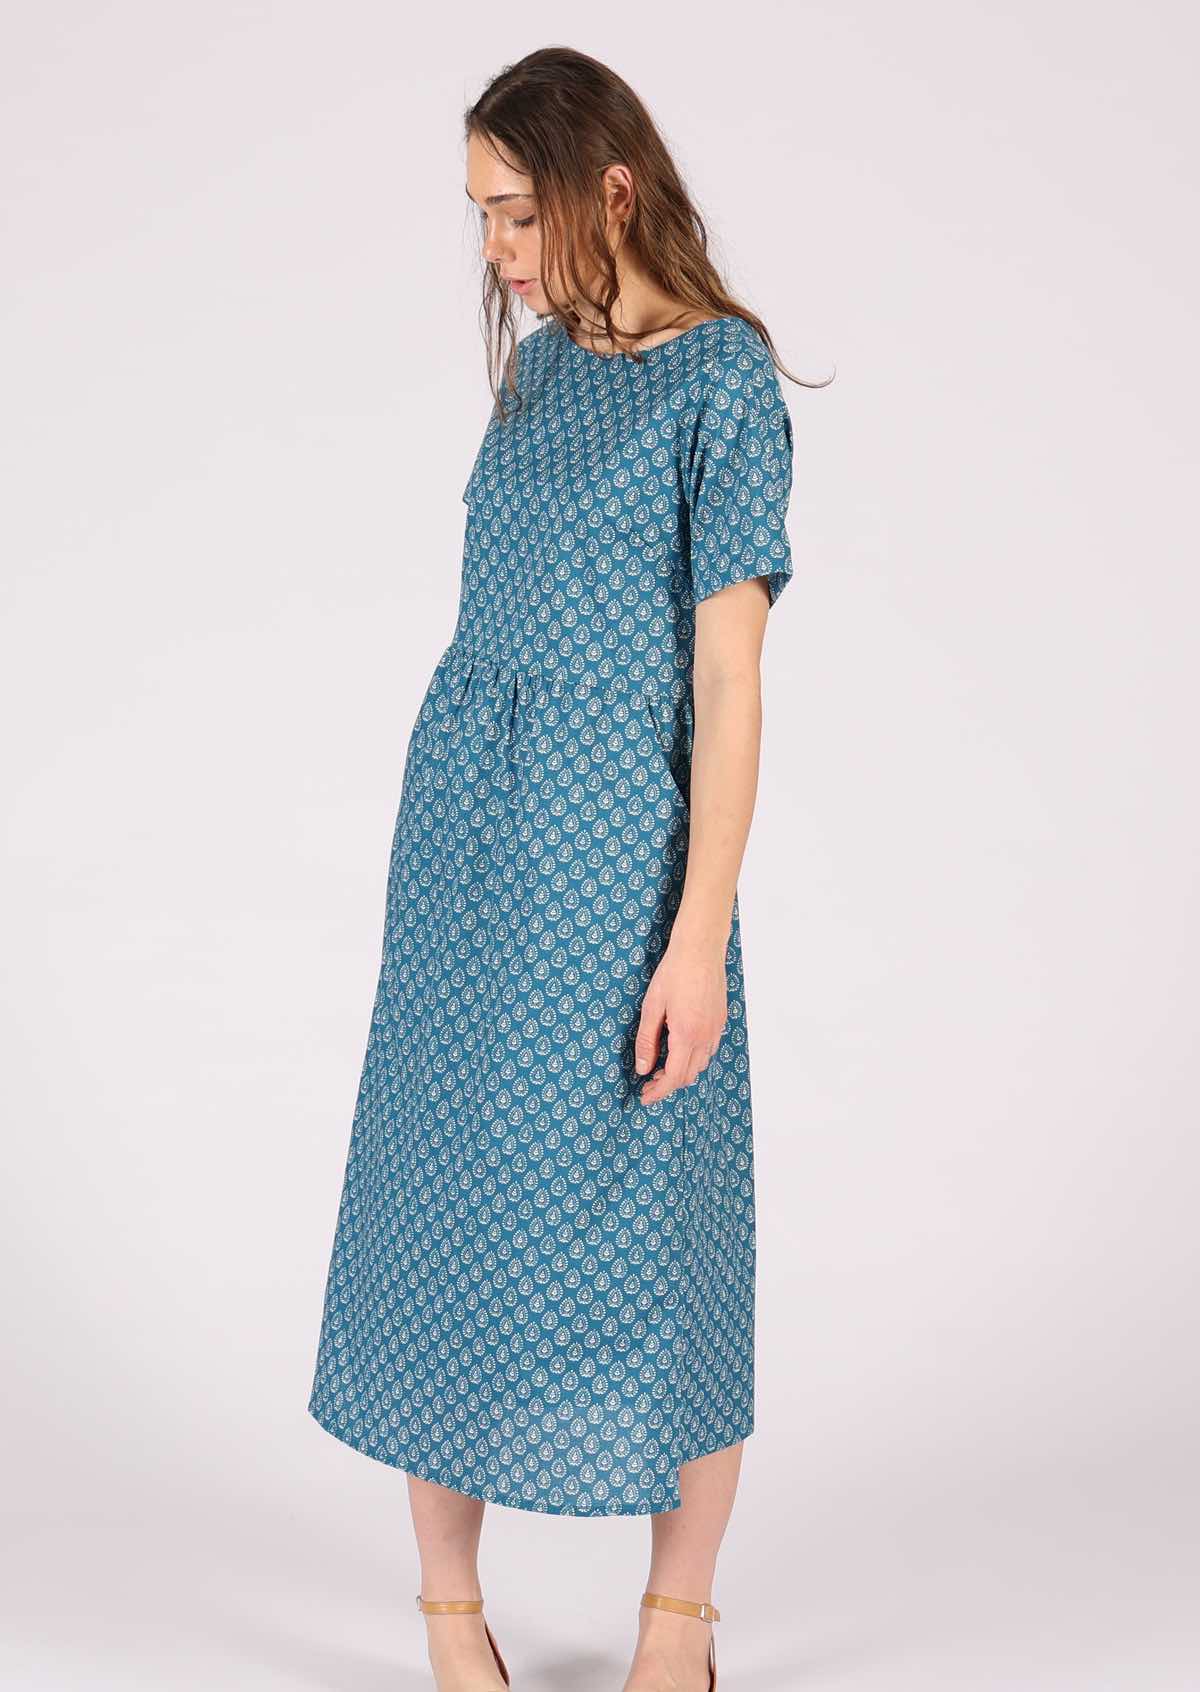 Mid shin length lightweight cotton dress with lining